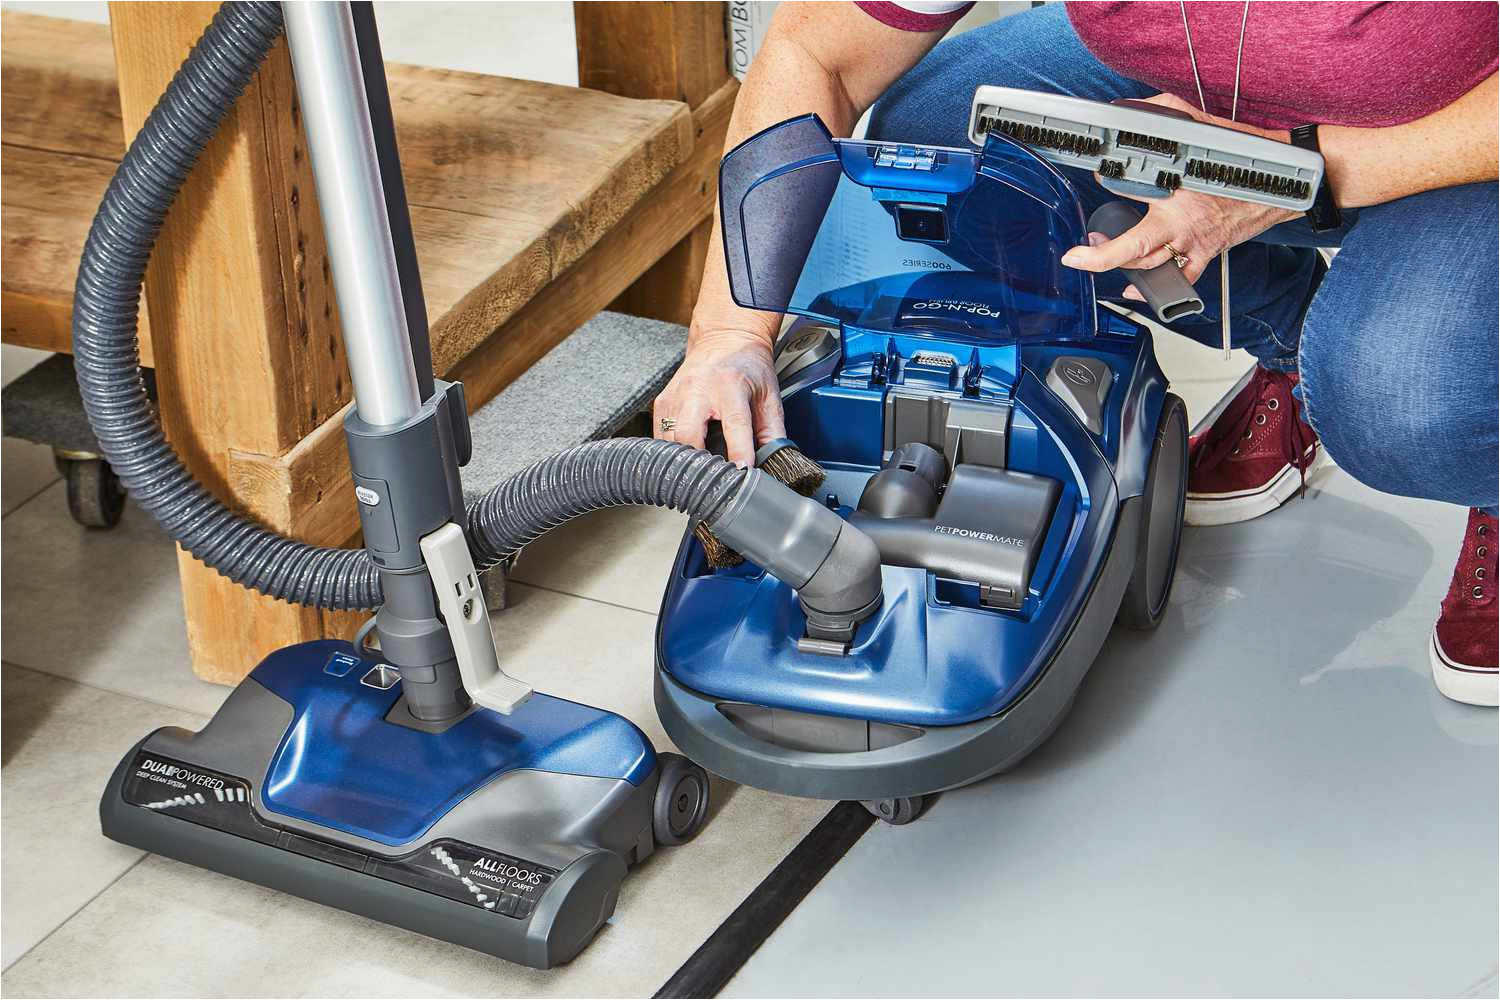 Best Vacuum for area Rugs and Pet Hair the 8 Best Vacuums for Pet Hair Of 2022, According to Testing